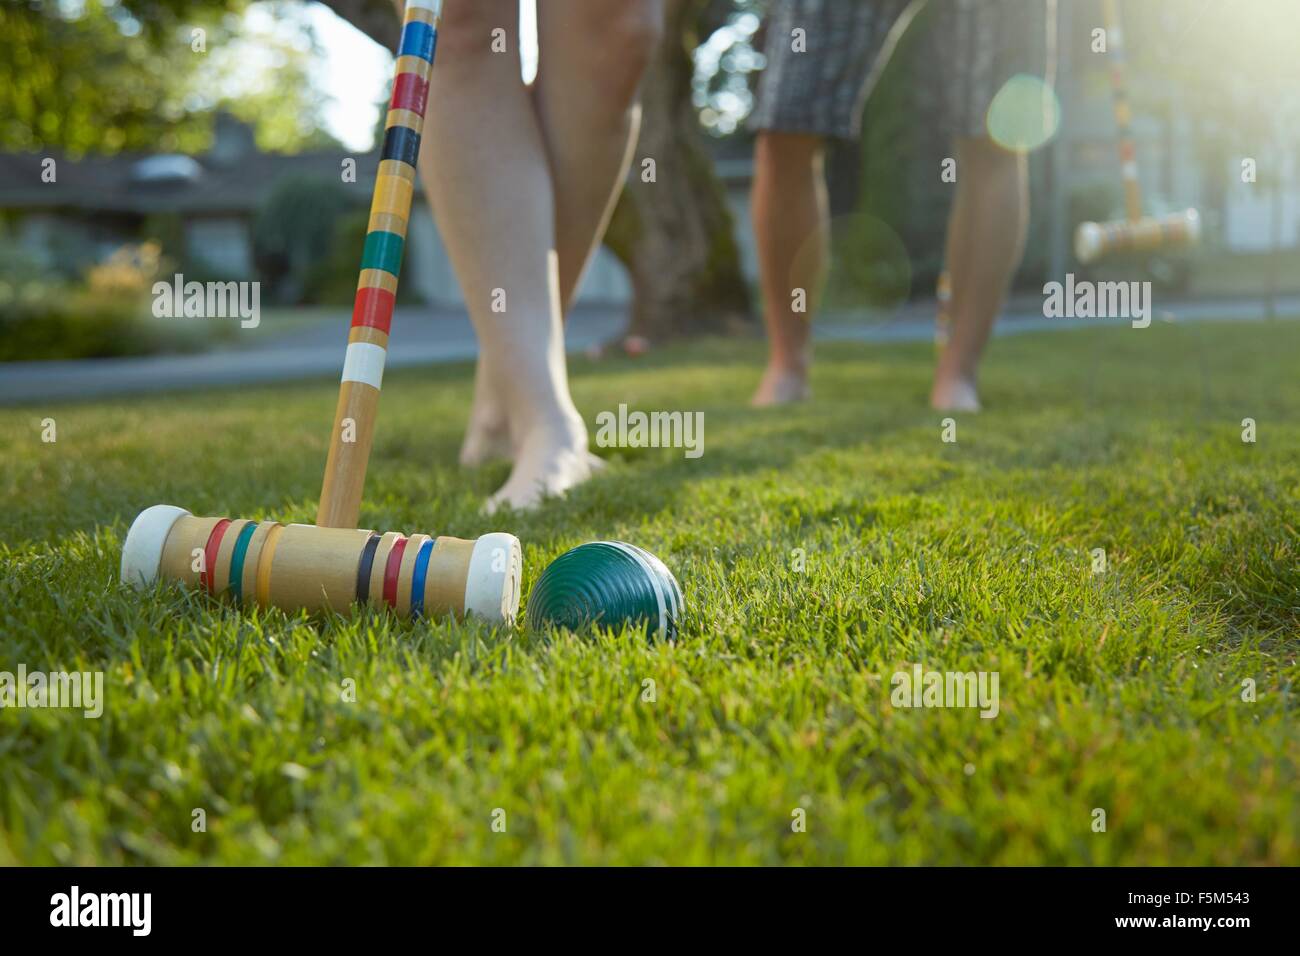 Legs and bare feet of young couple playing croquet on grass Stock Photo